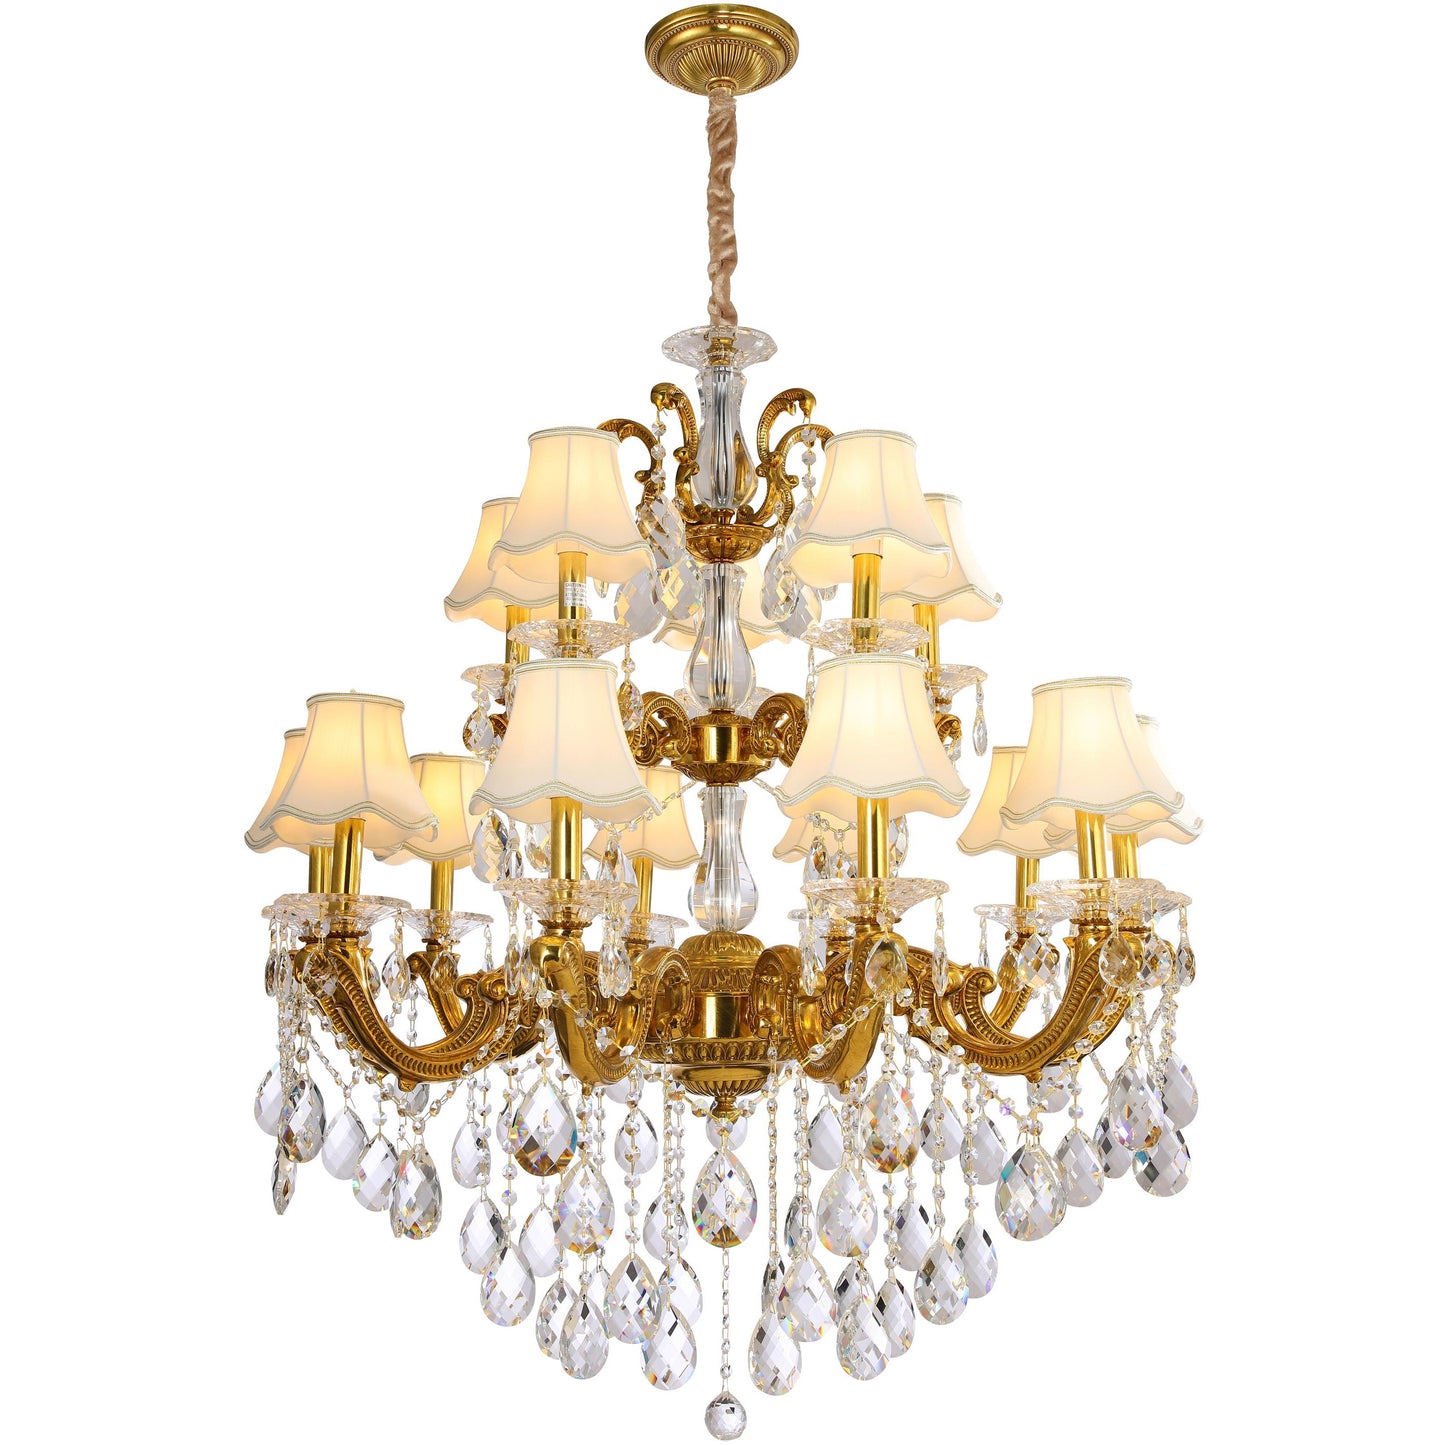 Three Tier Brass and Crystal Chandelier